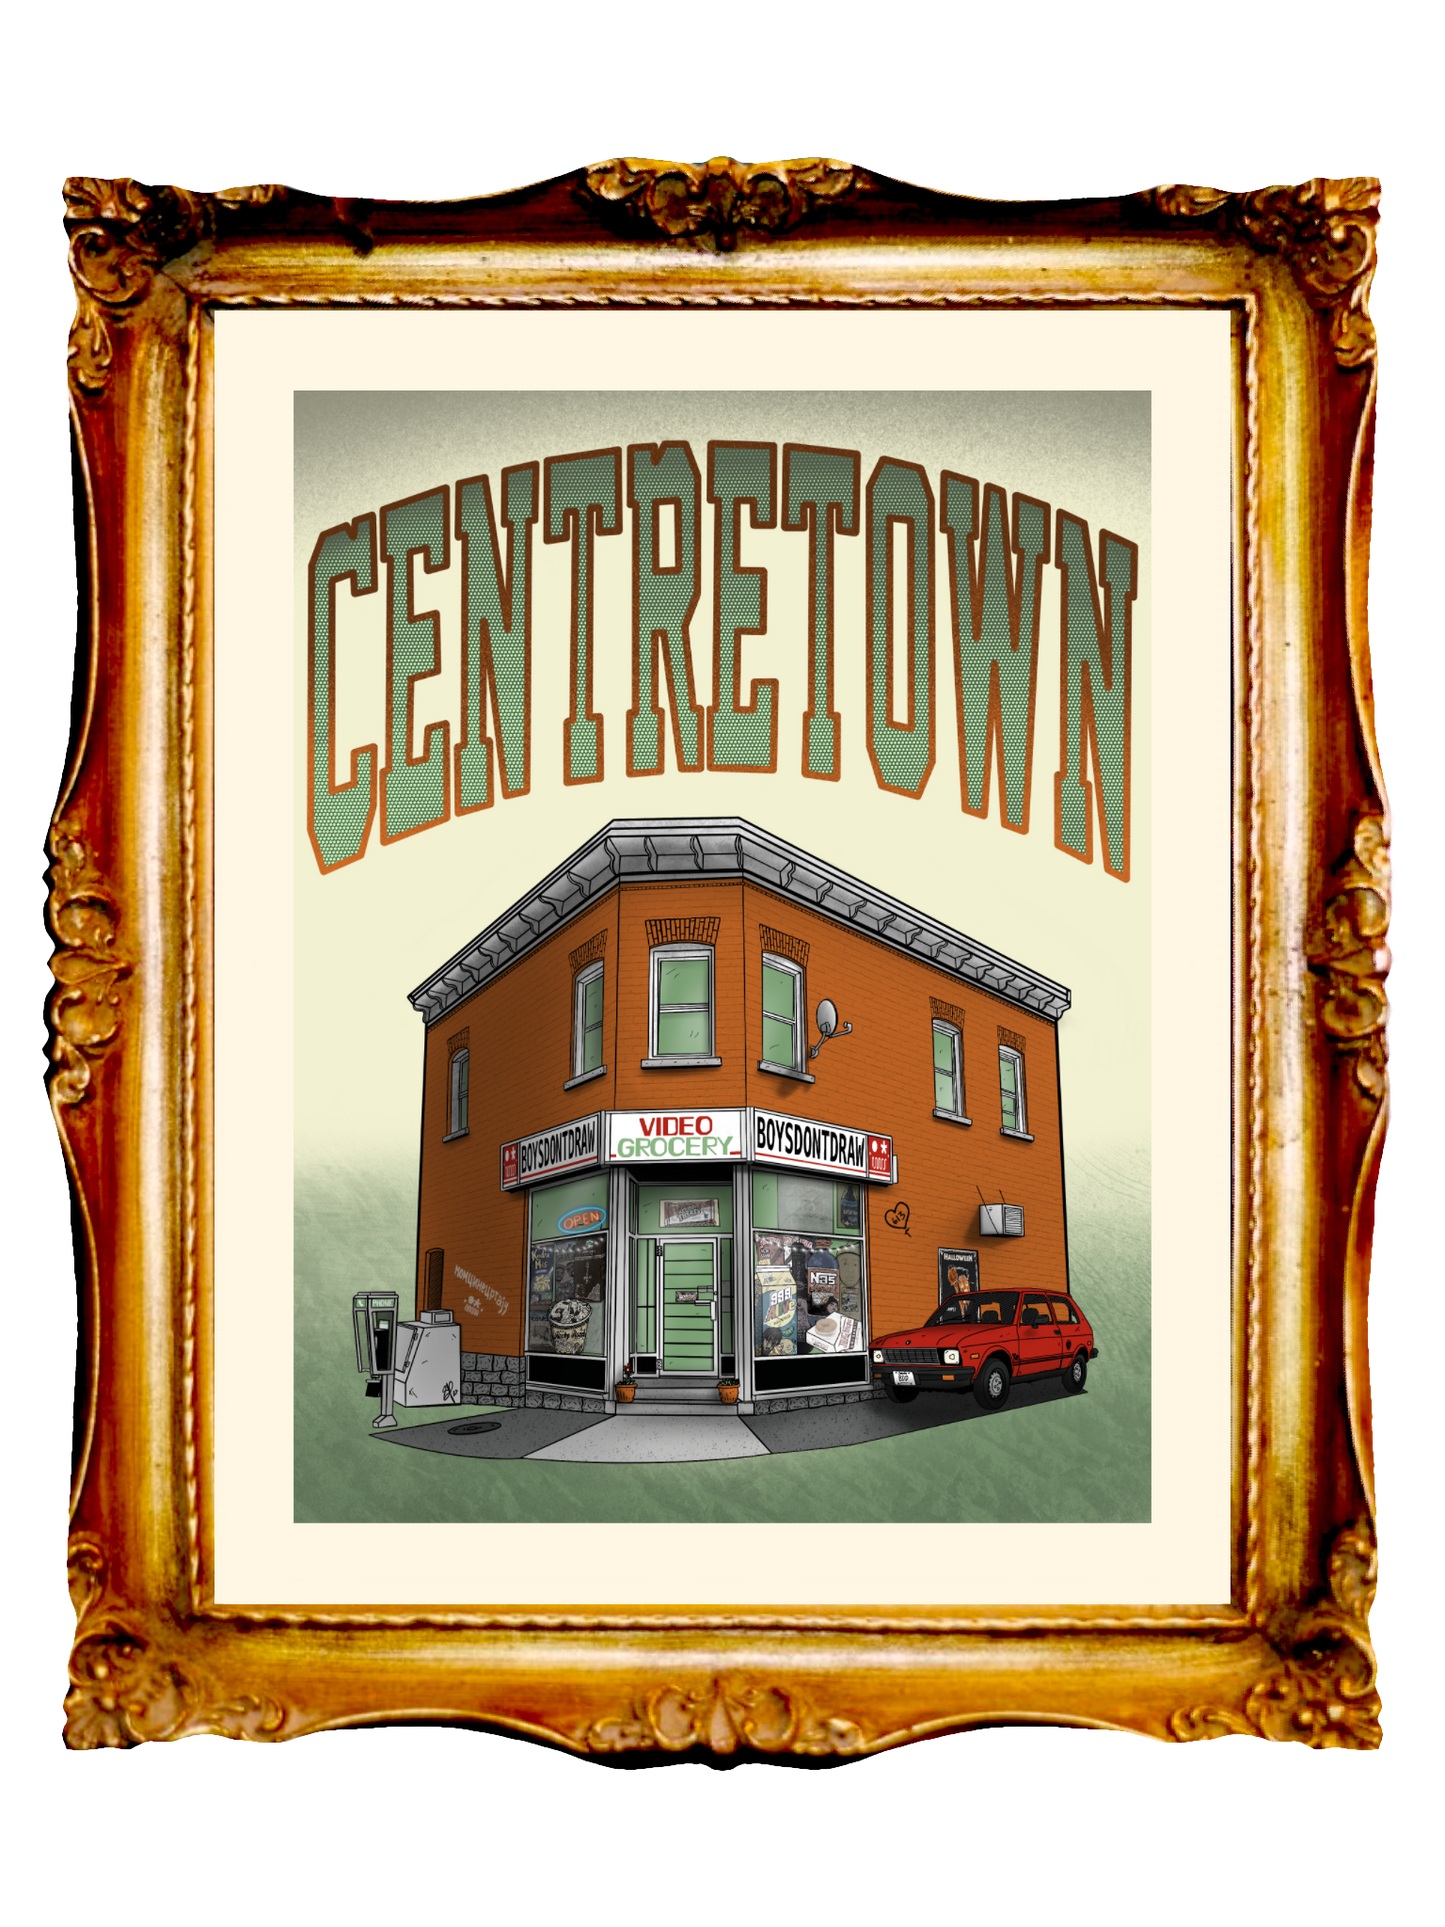 CENTRETOWN* - Limited Poster